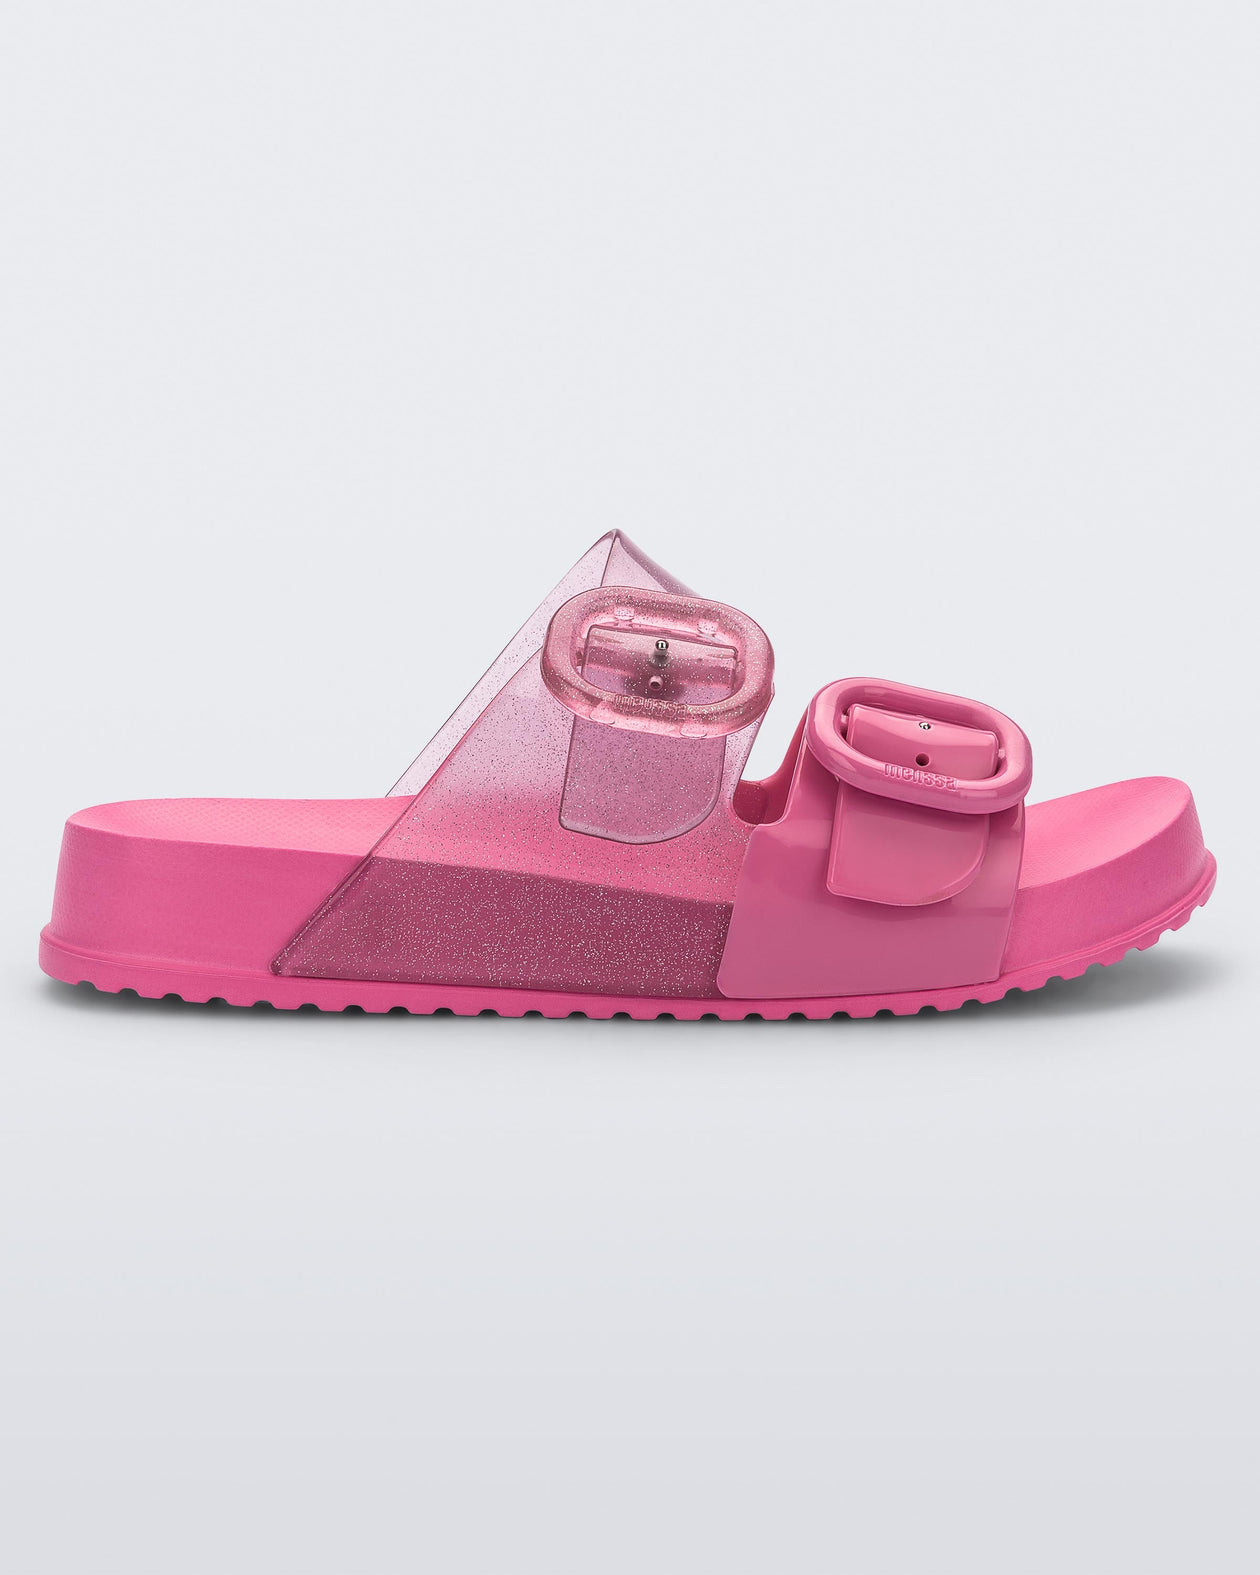 Side view of a pink Mini Melissa Cozy slide with two front straps with buckle details